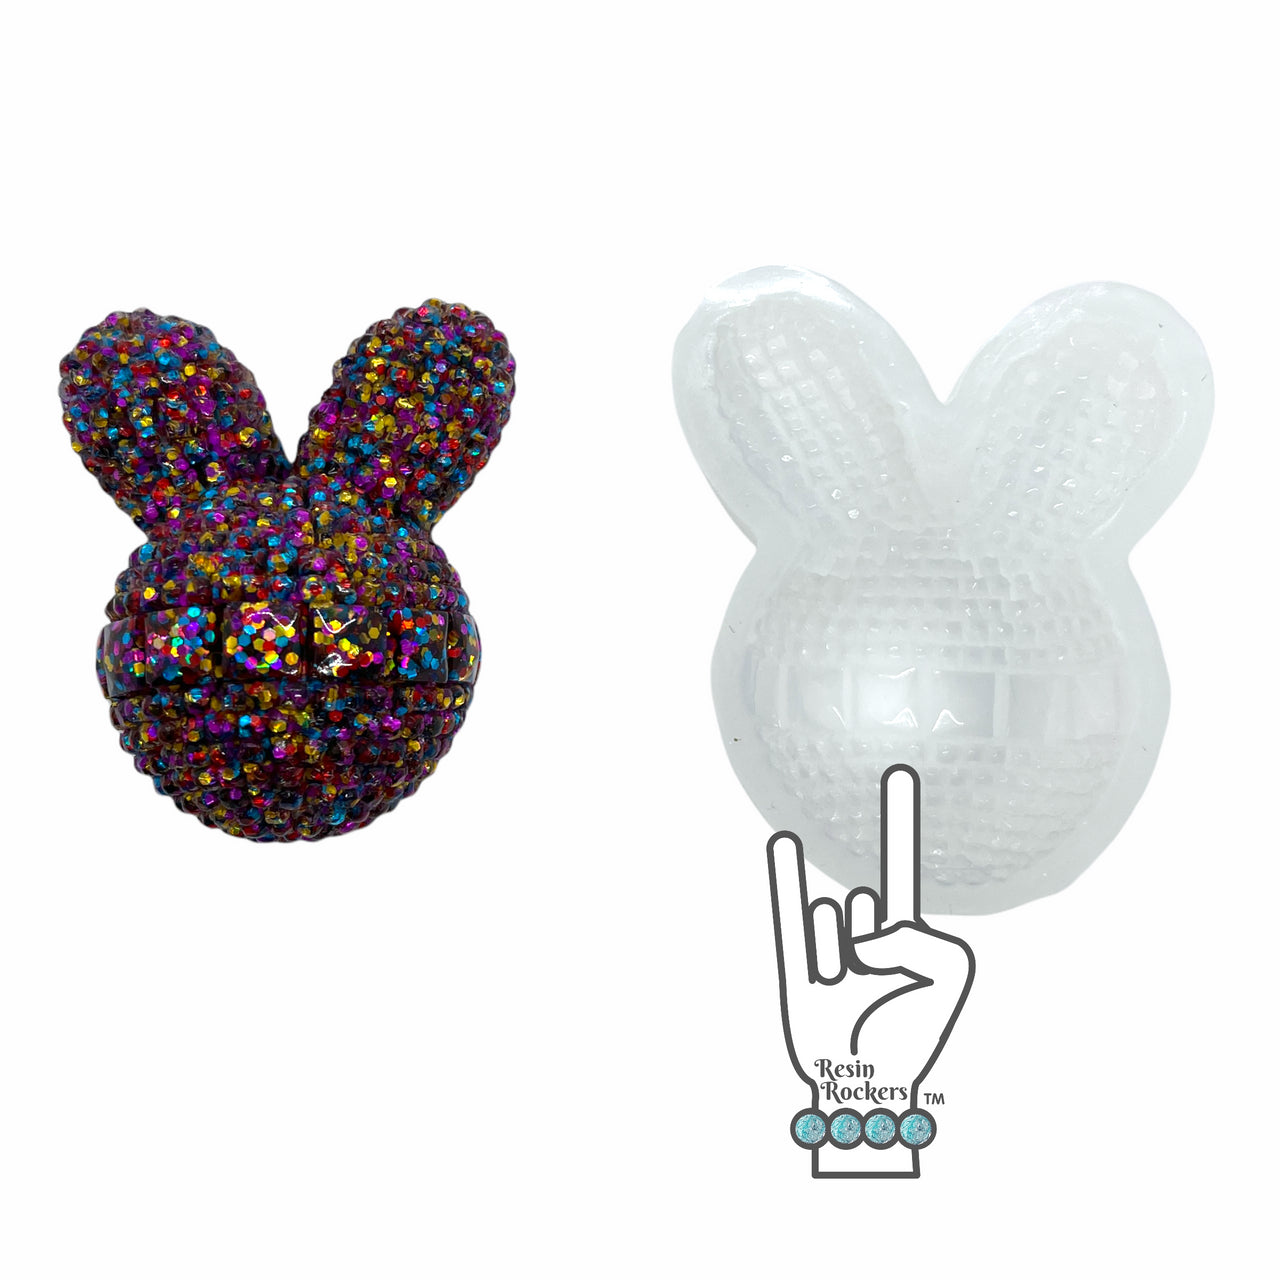 Druzy Boujee Bunny Transparent Silicone Mold for Epoxy and UV Resin Art